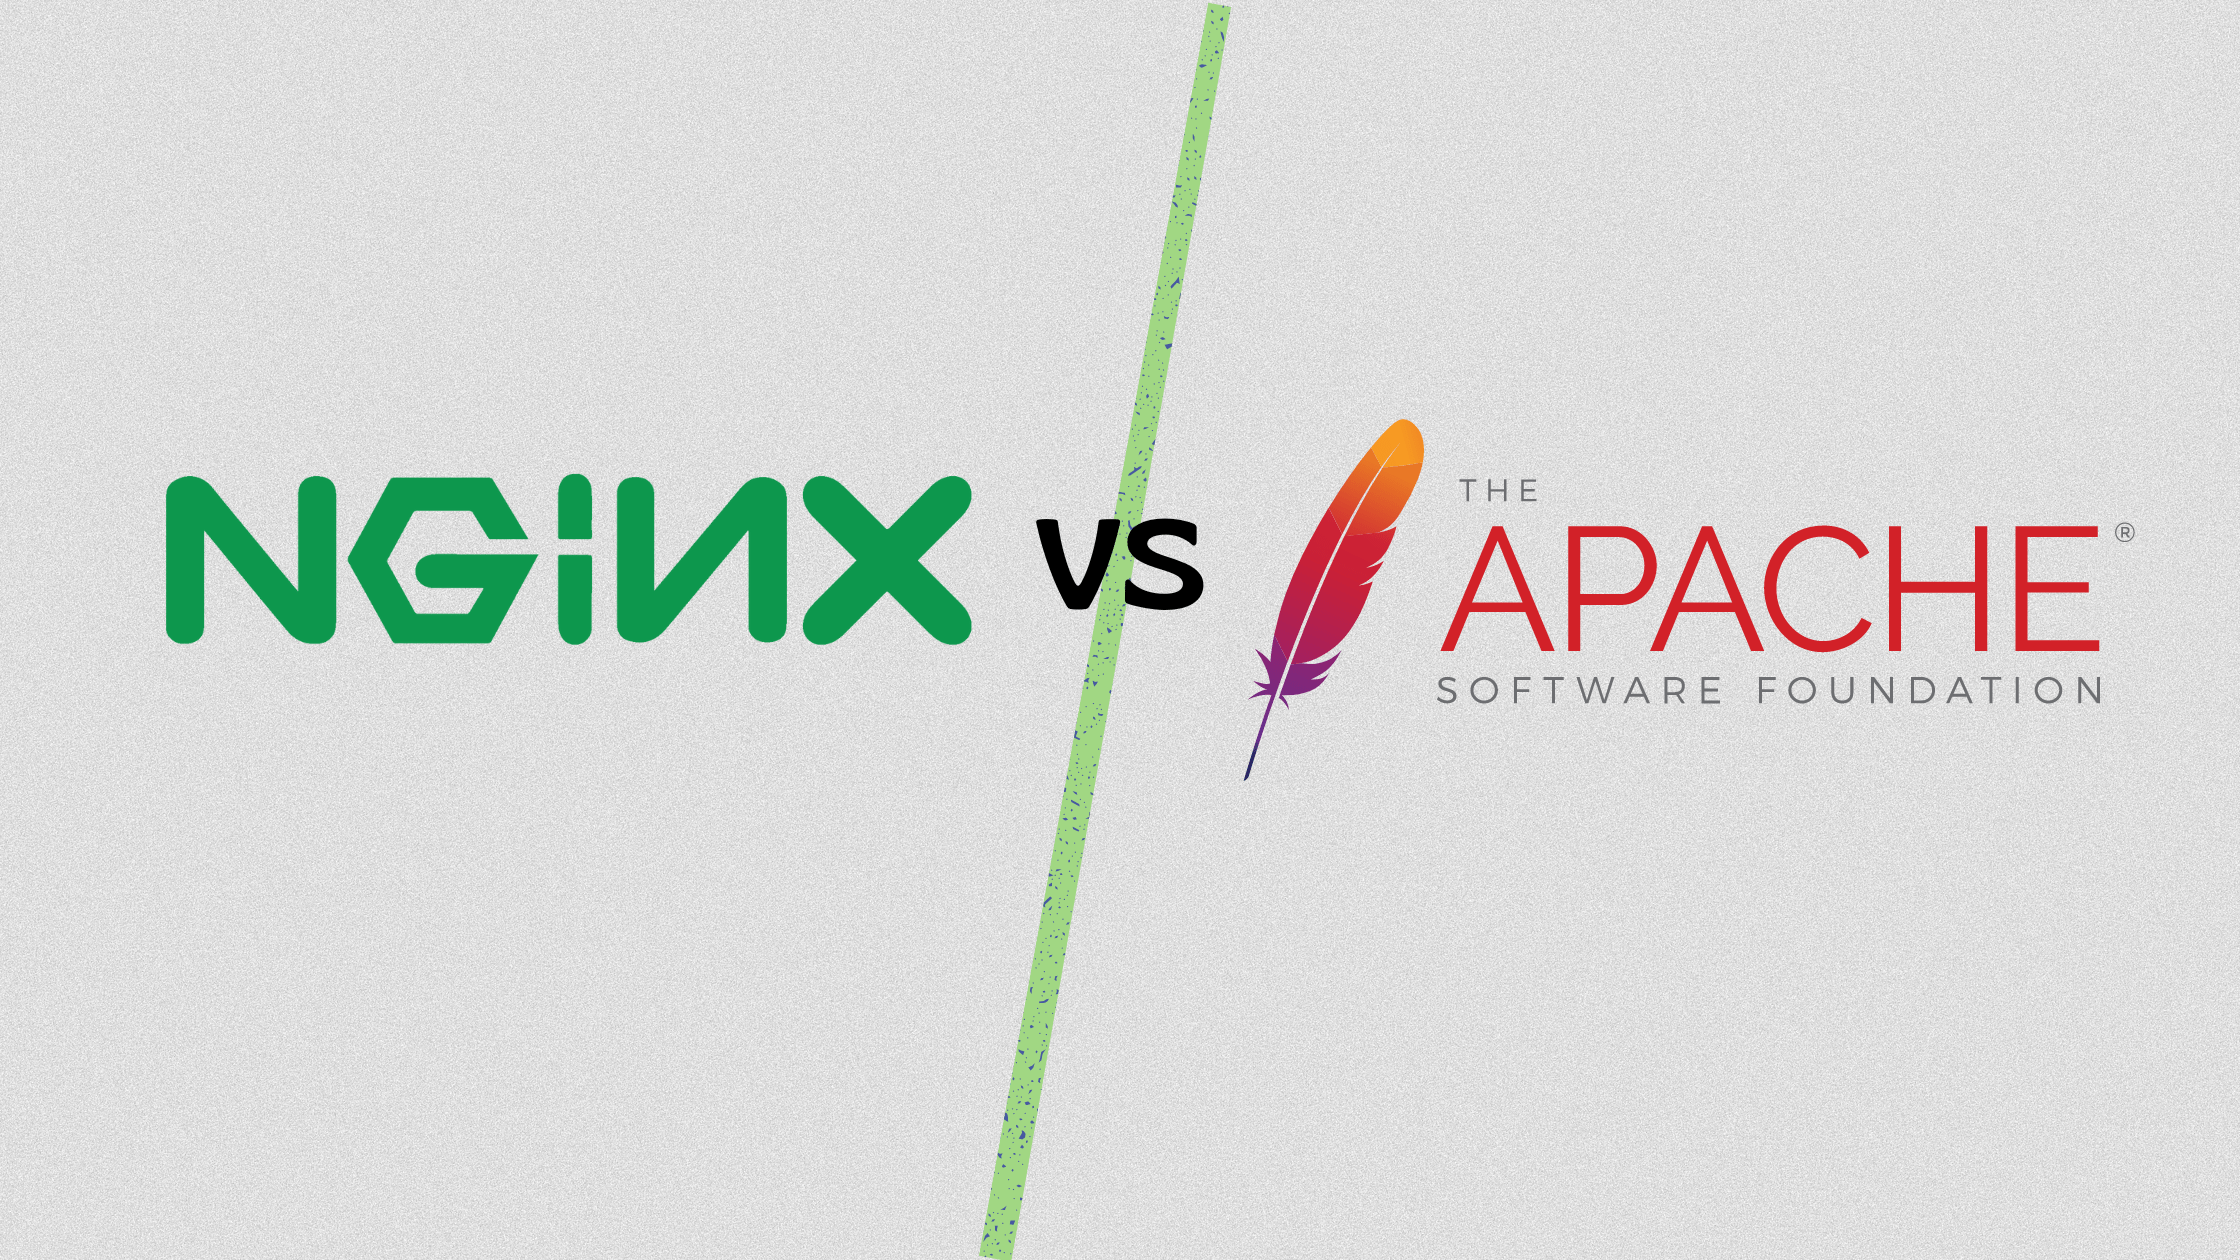 Apache 2 and Nginx - The Most Popular Web Servers, Learn More About Them!